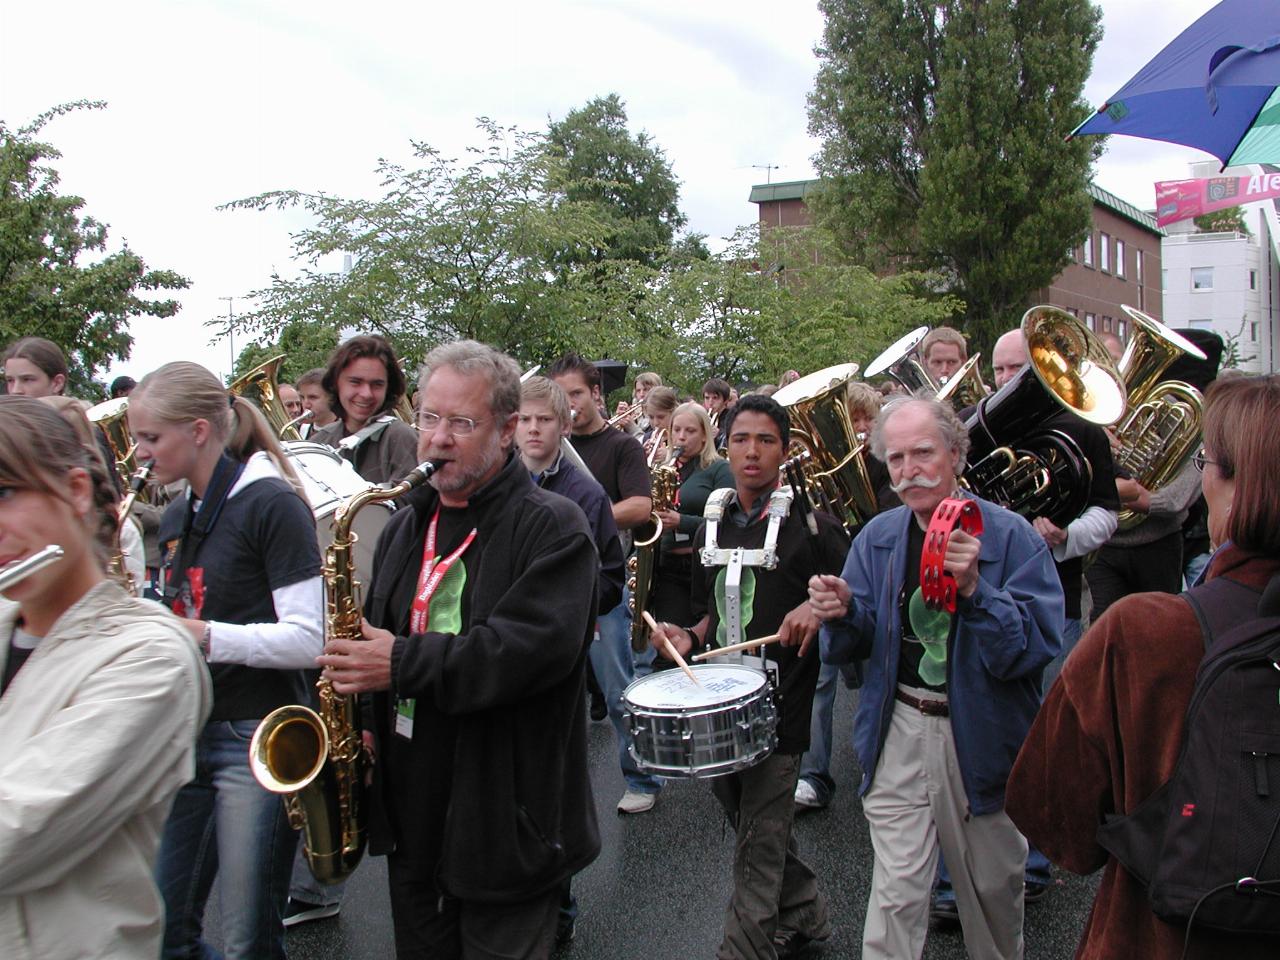 KPLU Viking Jazz: The Parade moves on towards the Town Hall Square